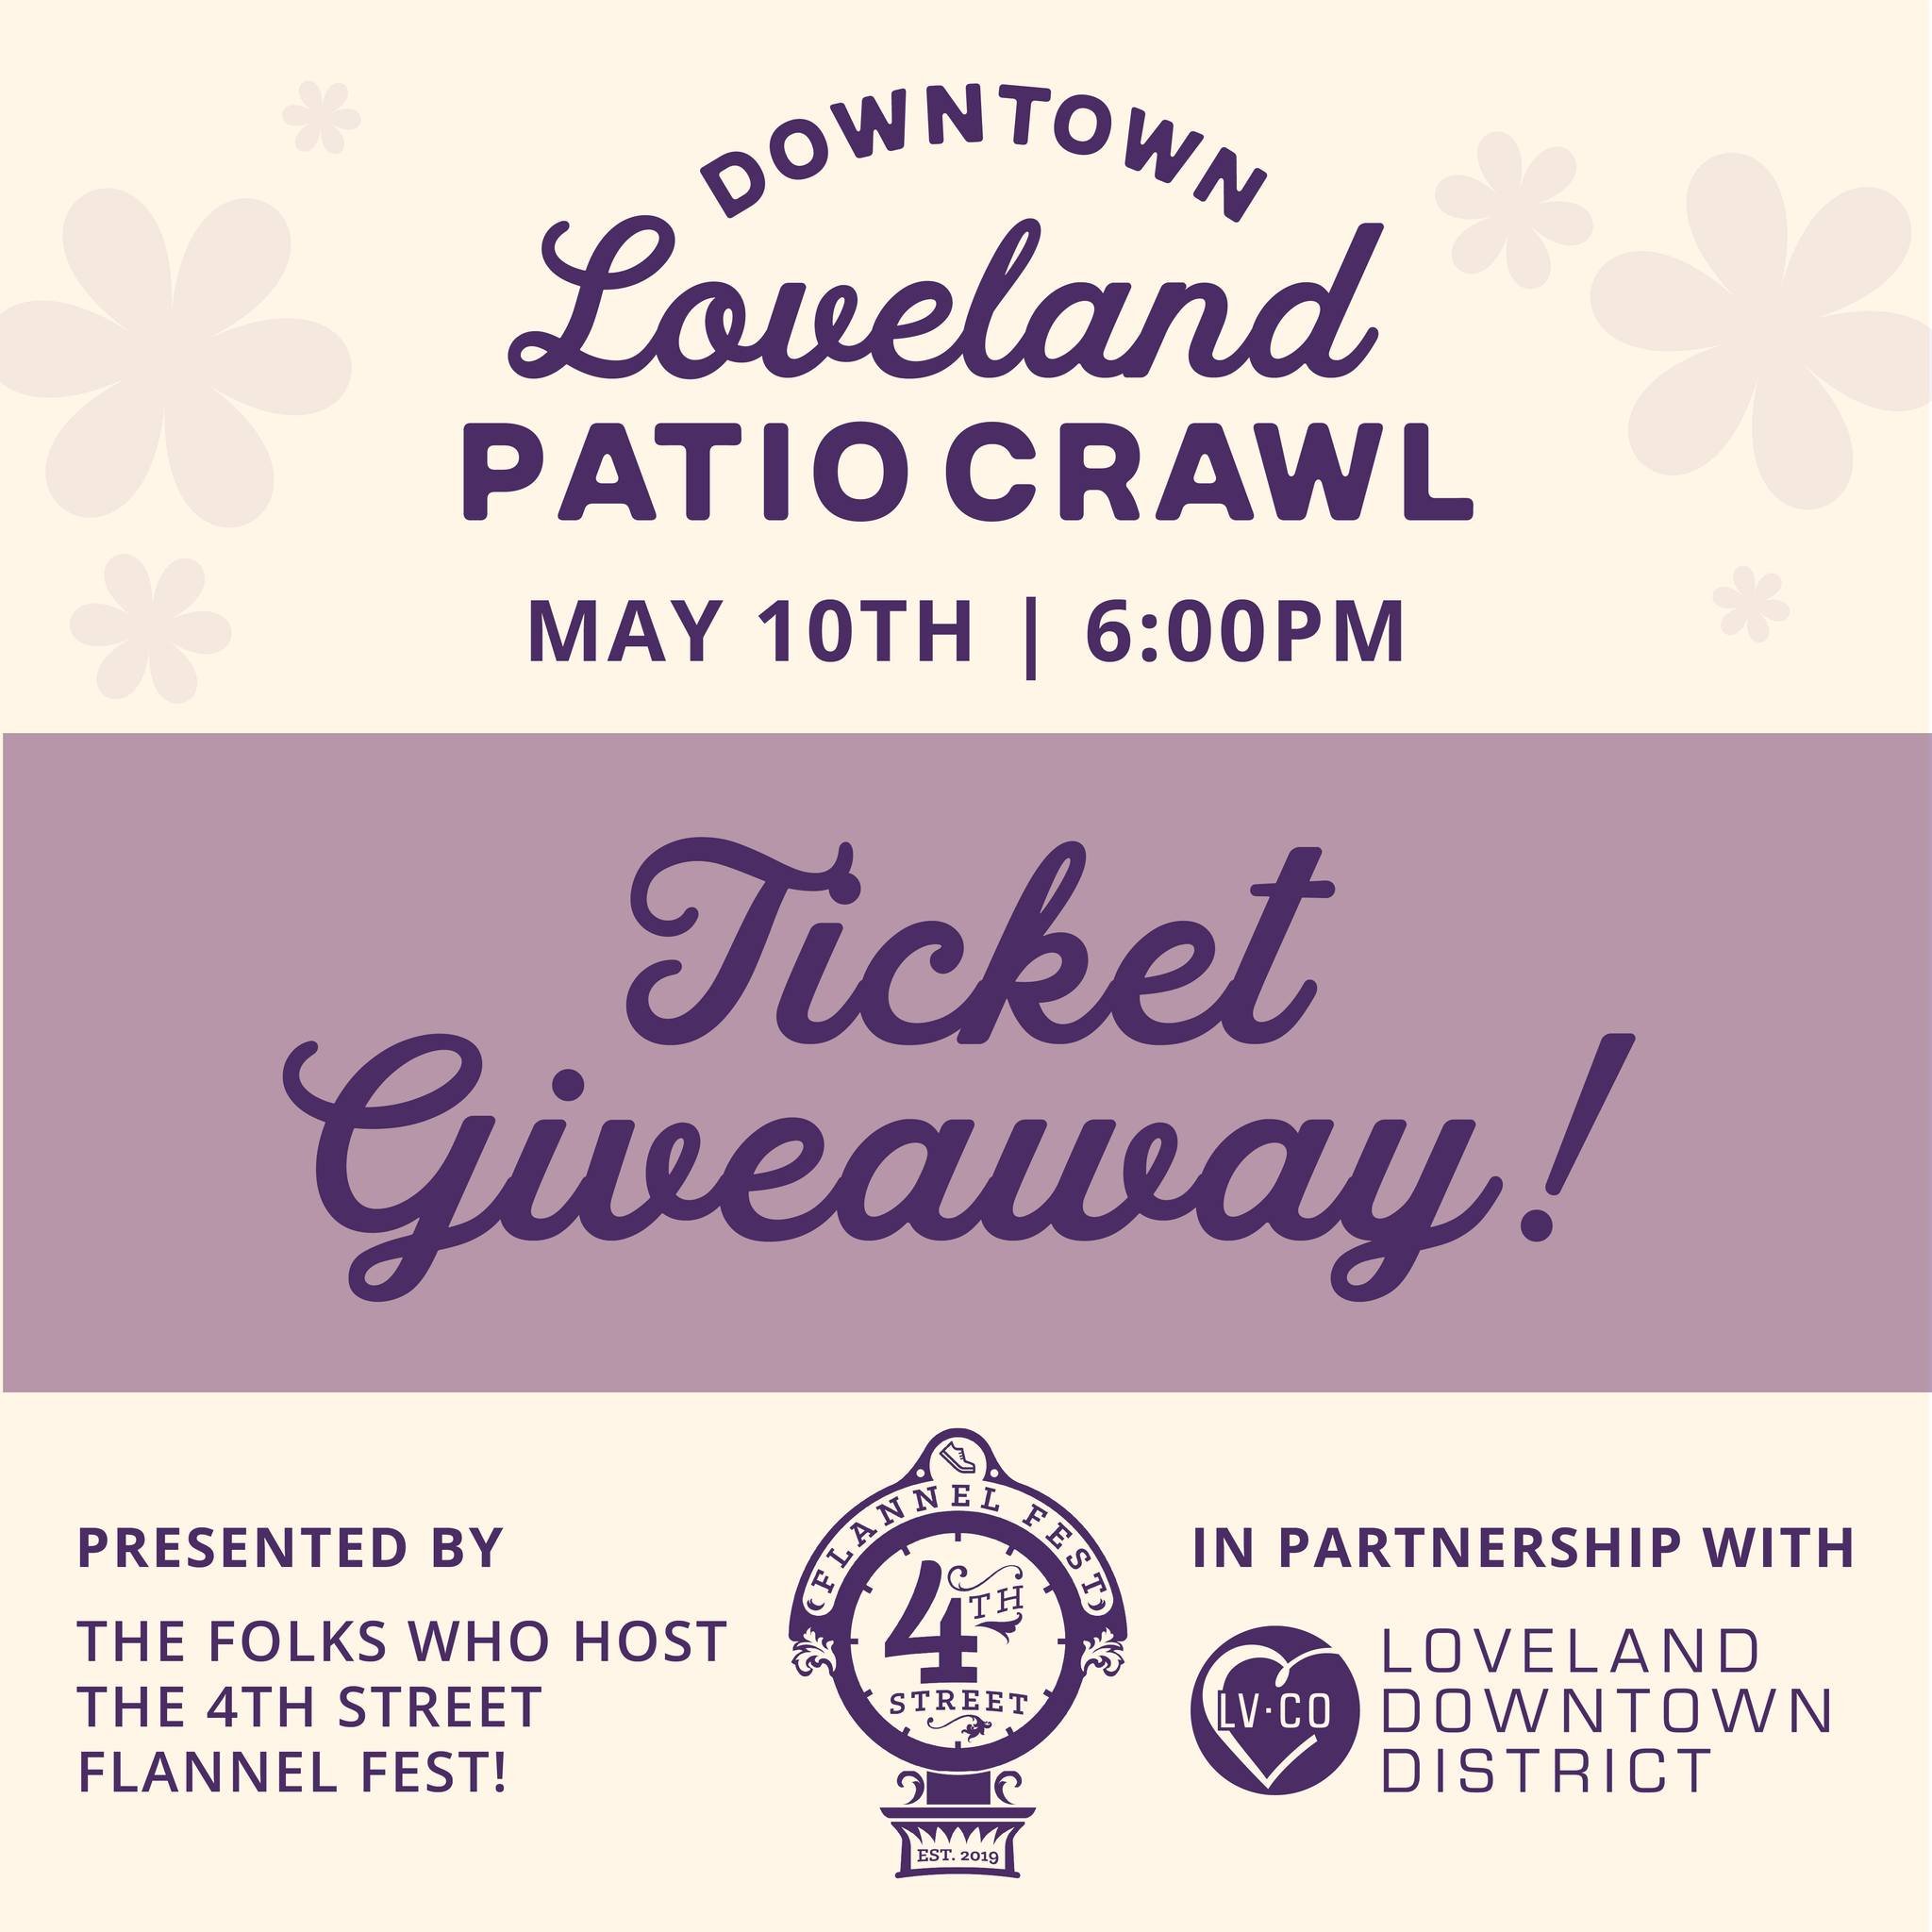 The folks who host our Annual Flannel Fest are throwing a Downtown Loveland Patio Crawl and they&rsquo;re GIVING AWAY 2 tickets! 
To enter this Giveaway: tag a friend you&rsquo;d like to go with and be sure you&rsquo;re following our account, @sweeth